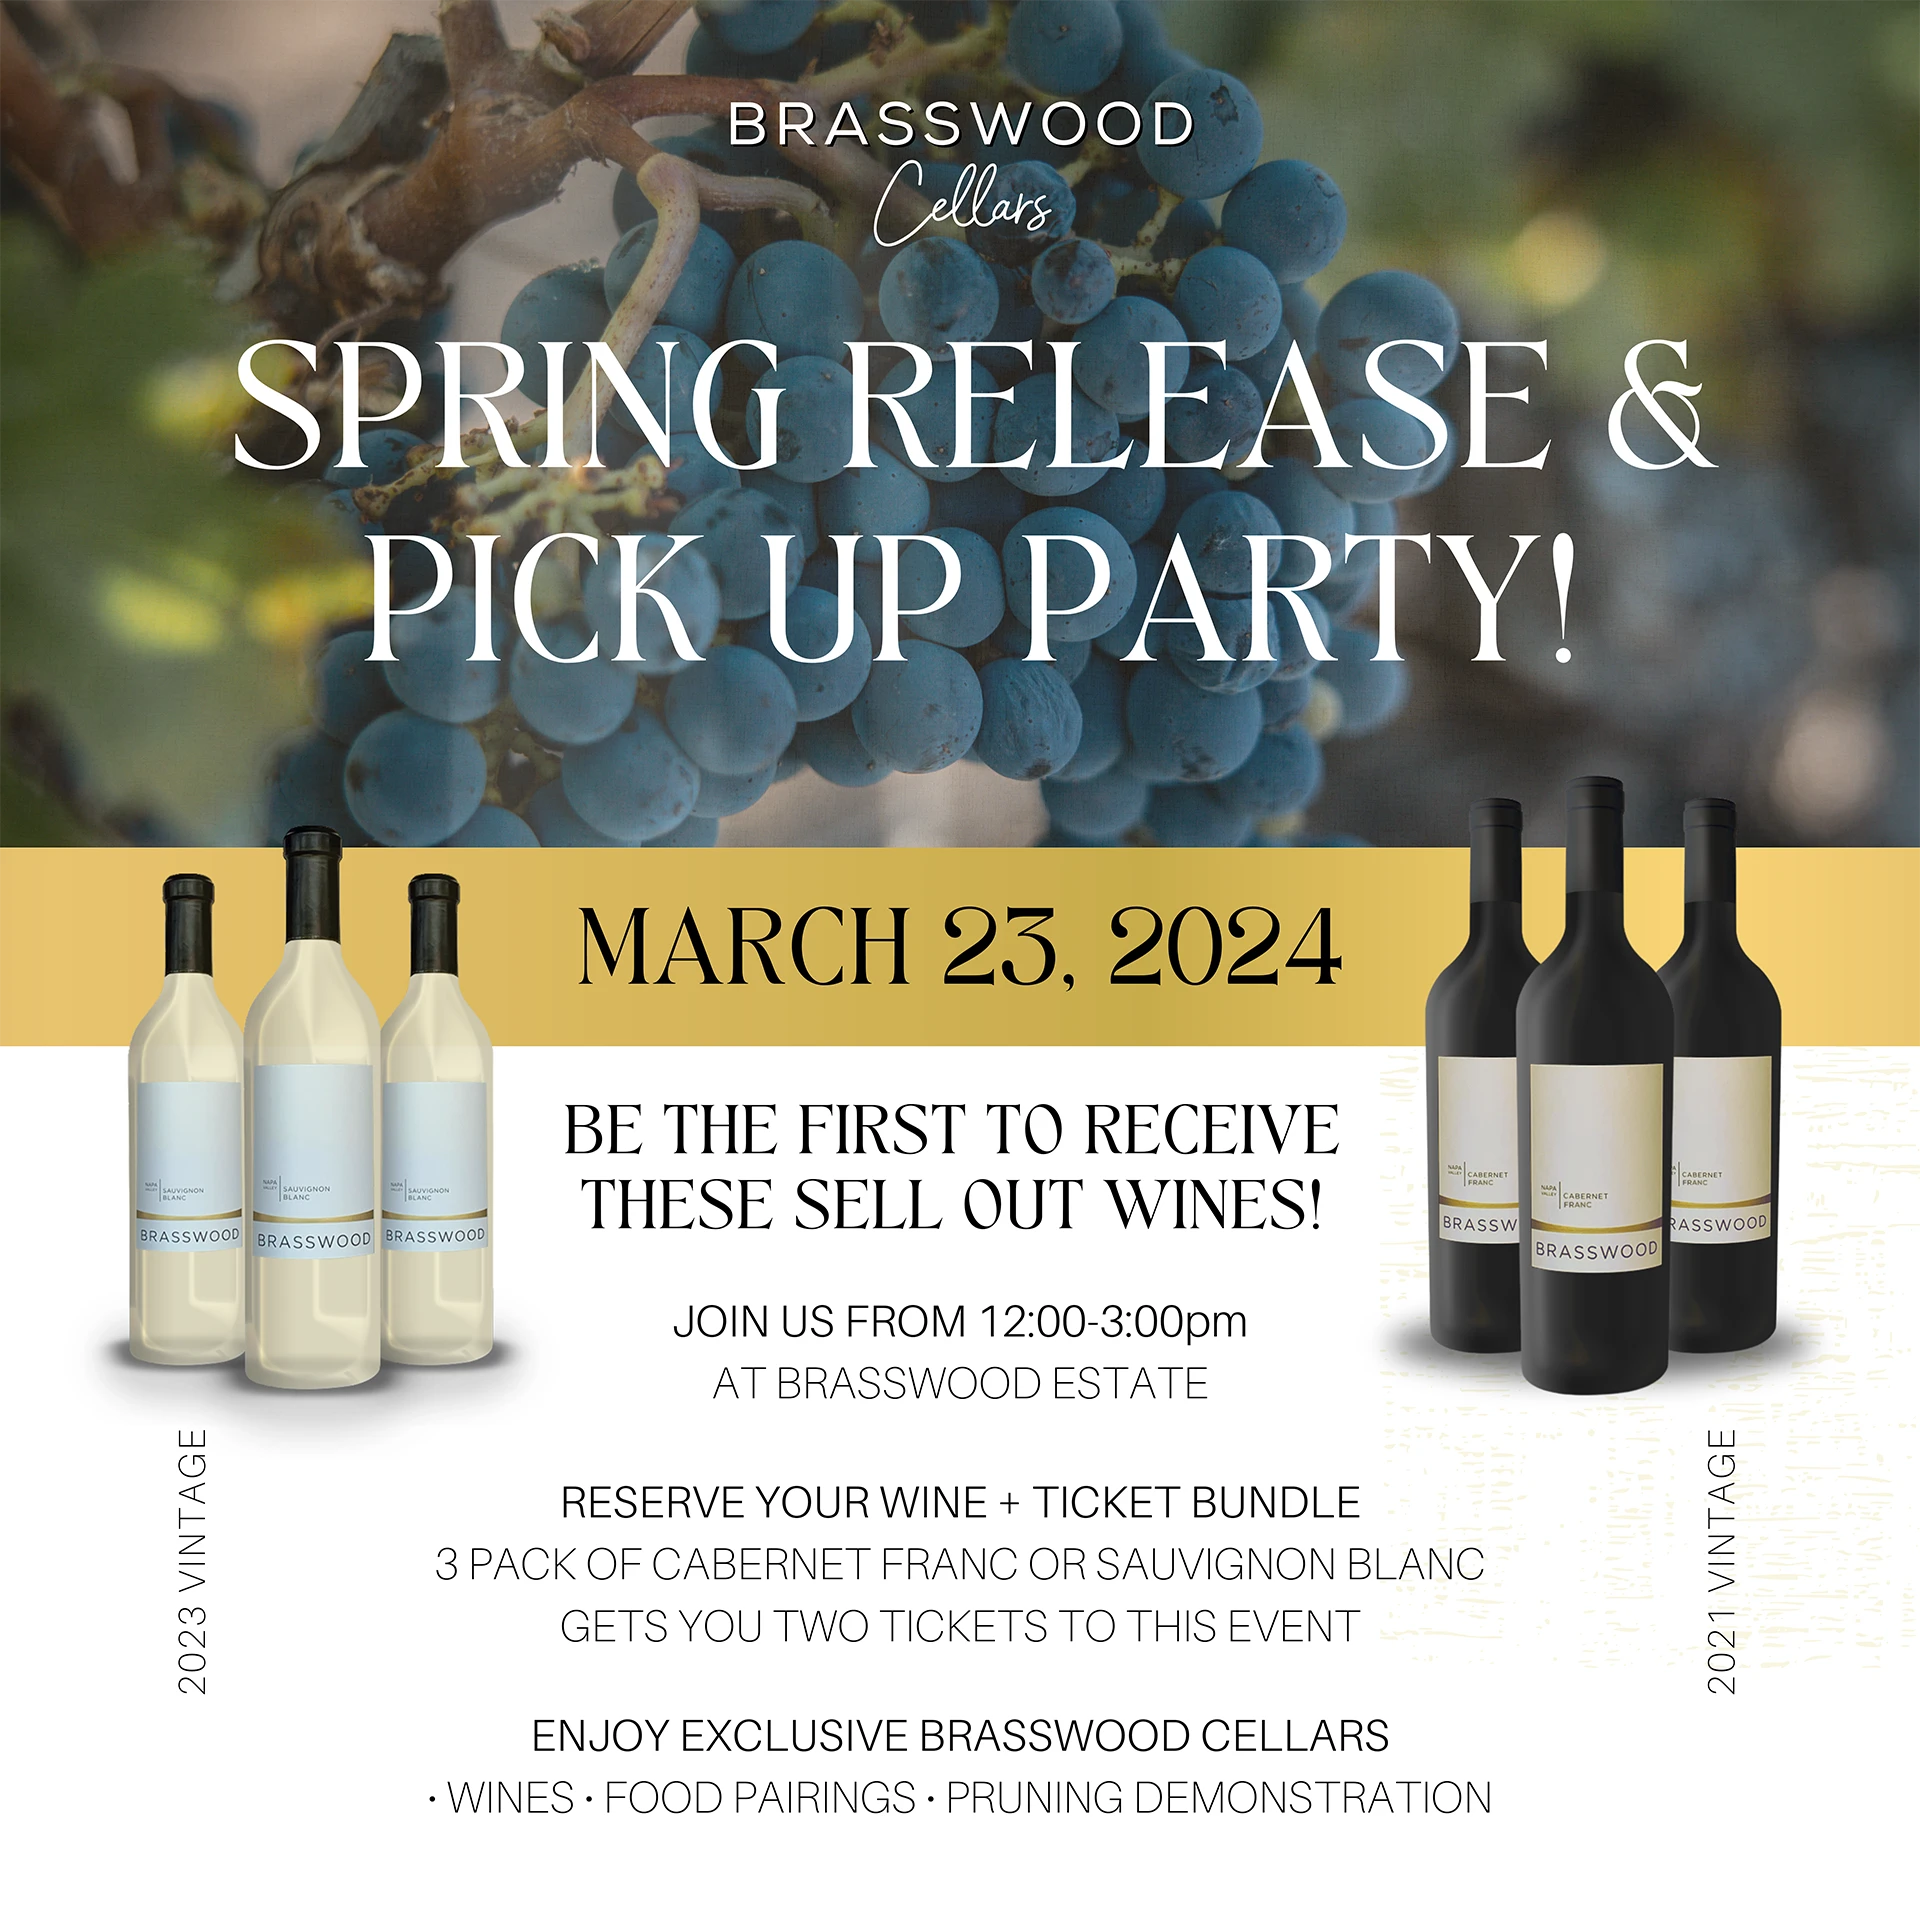 A promotional ad featuring the Brasswood Cabernet Franc and Sauvignon Blanc, for the spring release pick up party at Brasswood Estate, March 23rd, 2024